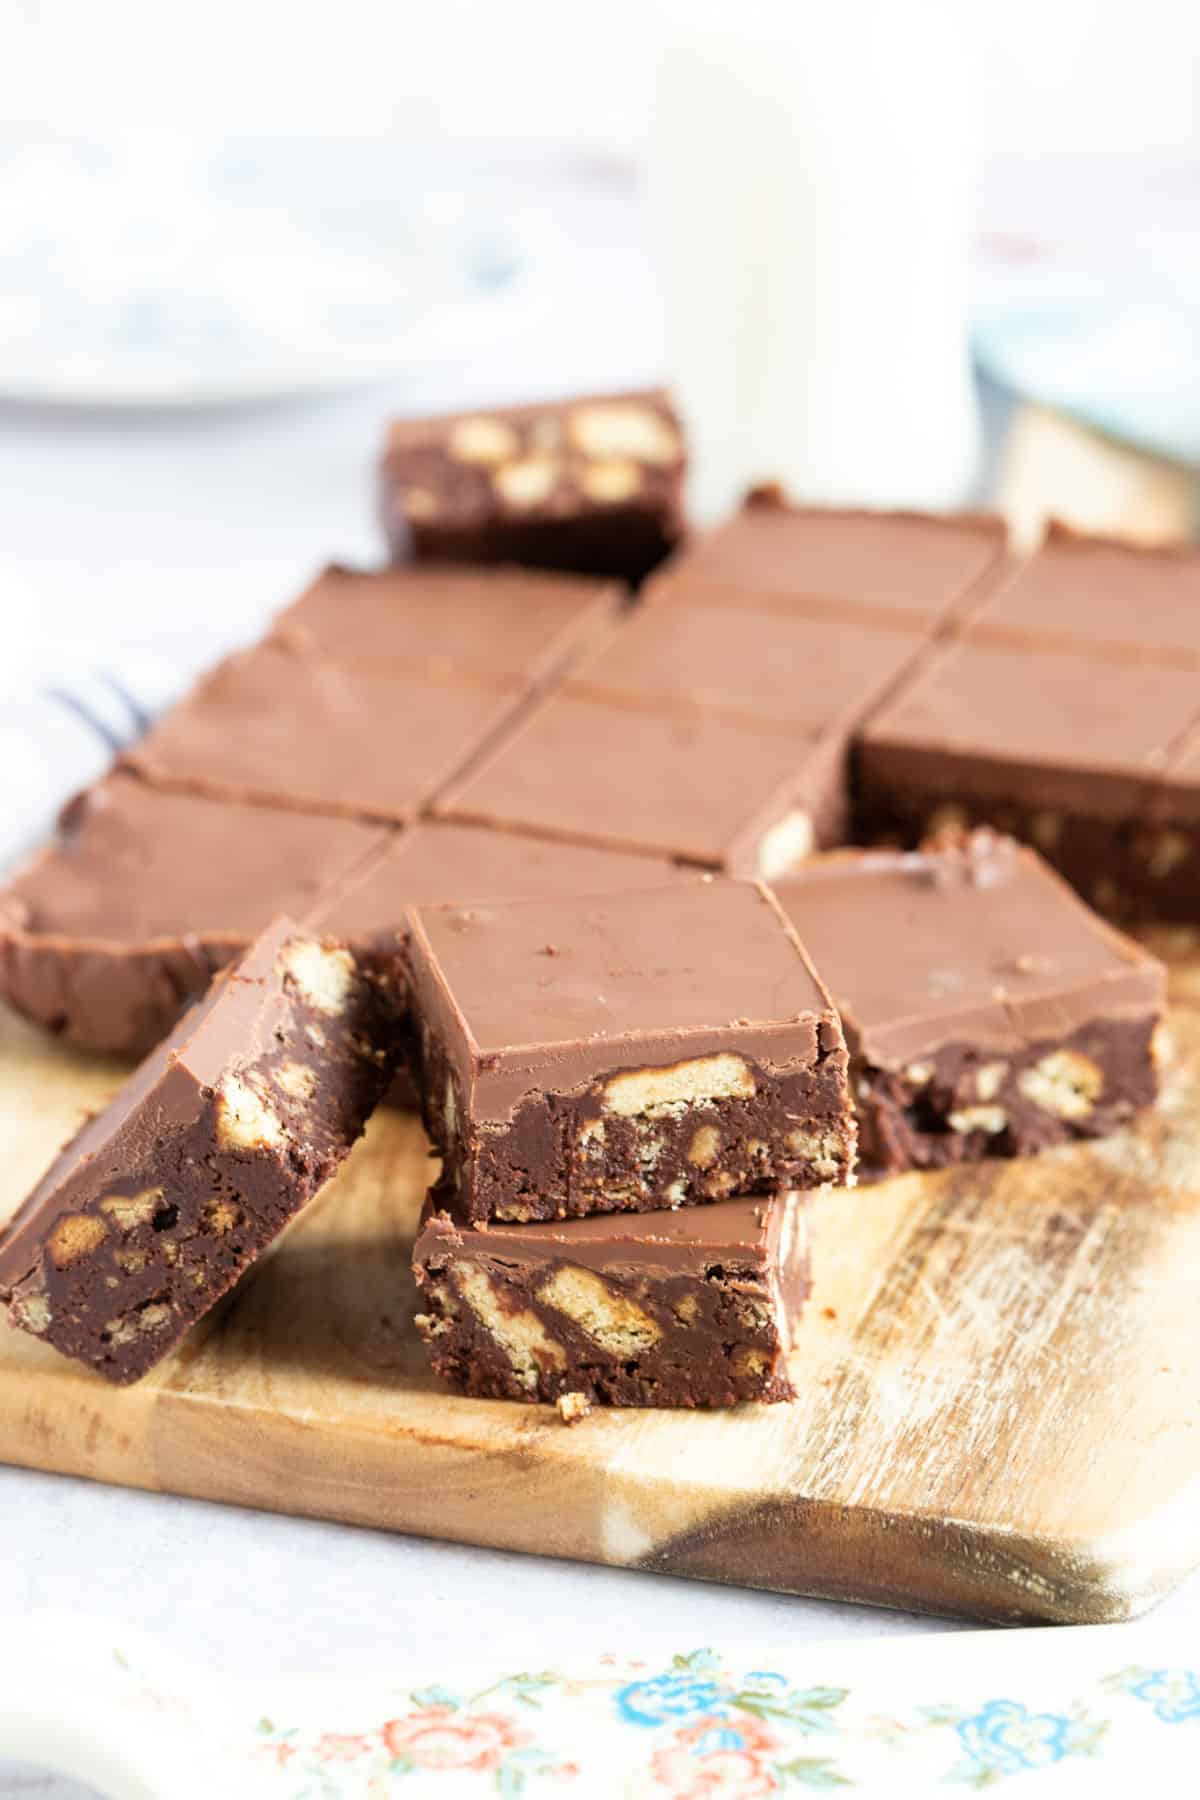 Chocolate tiffin on a wooden board.